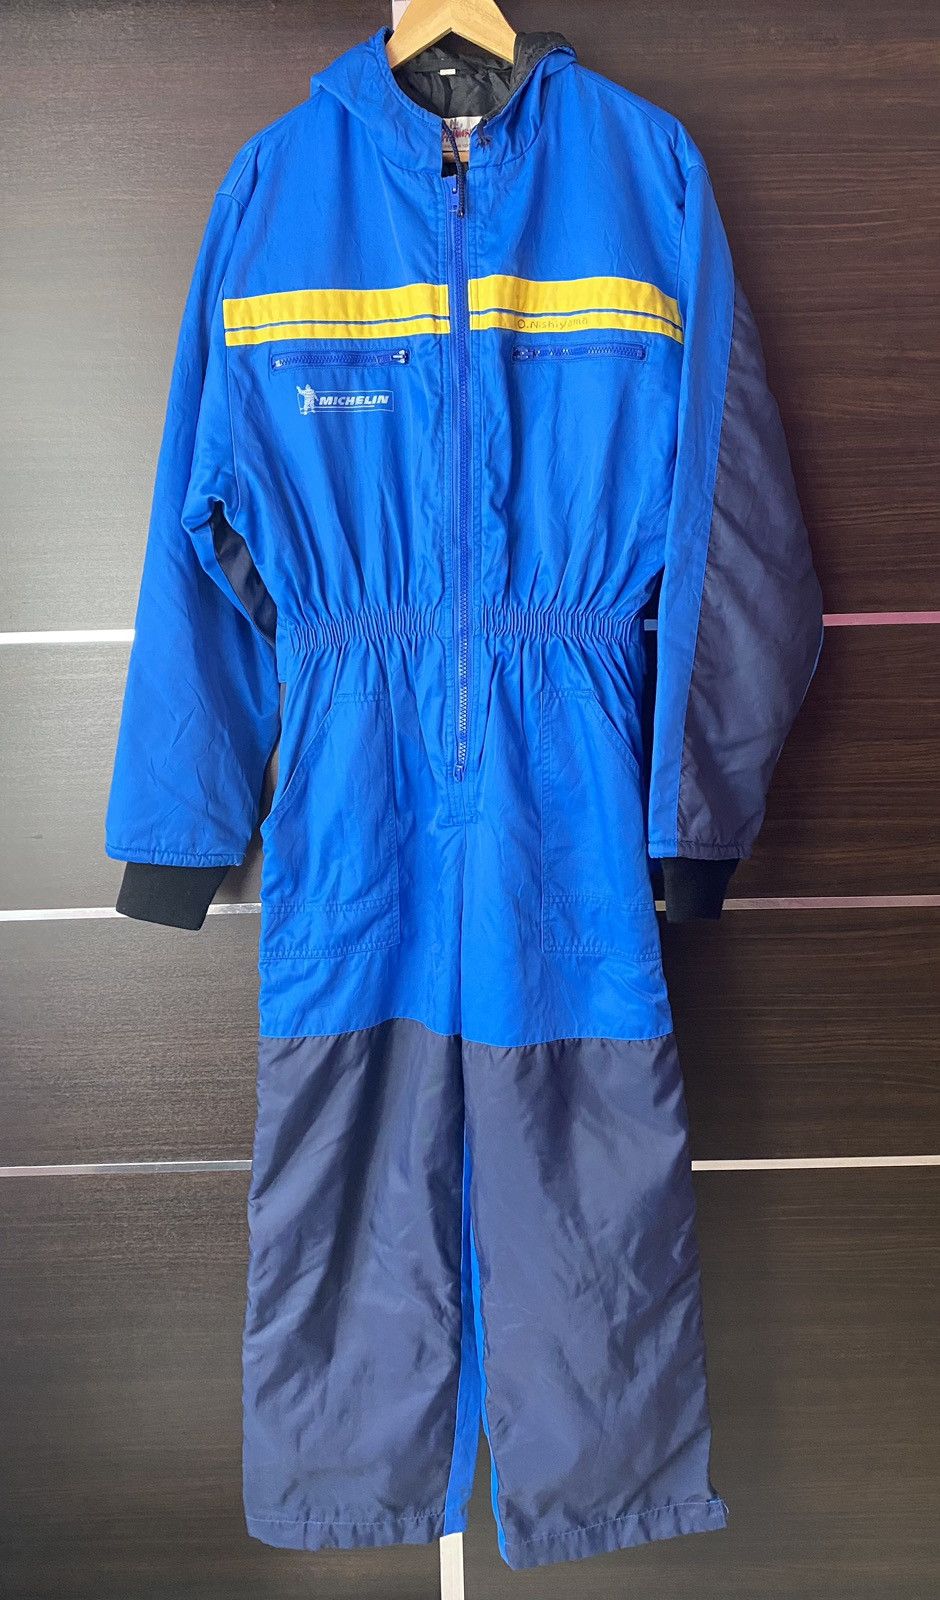 Sports Specialties - Vintage Michelin Racing Suit Overall - 1